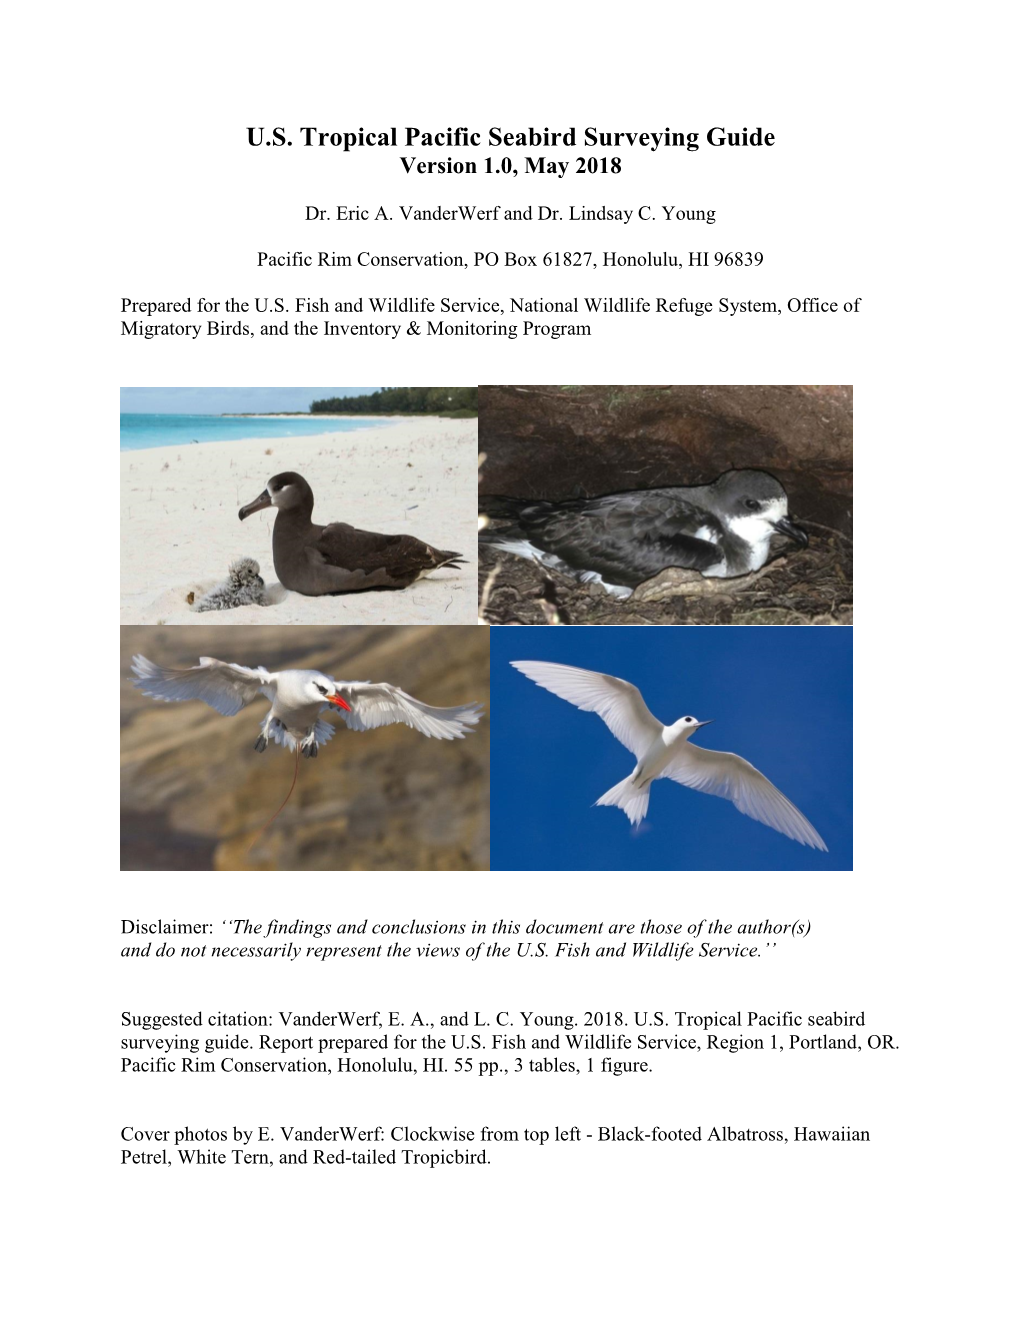 U.S. Tropical Pacific Seabird Surveying Guide Version 1.0, May 2018